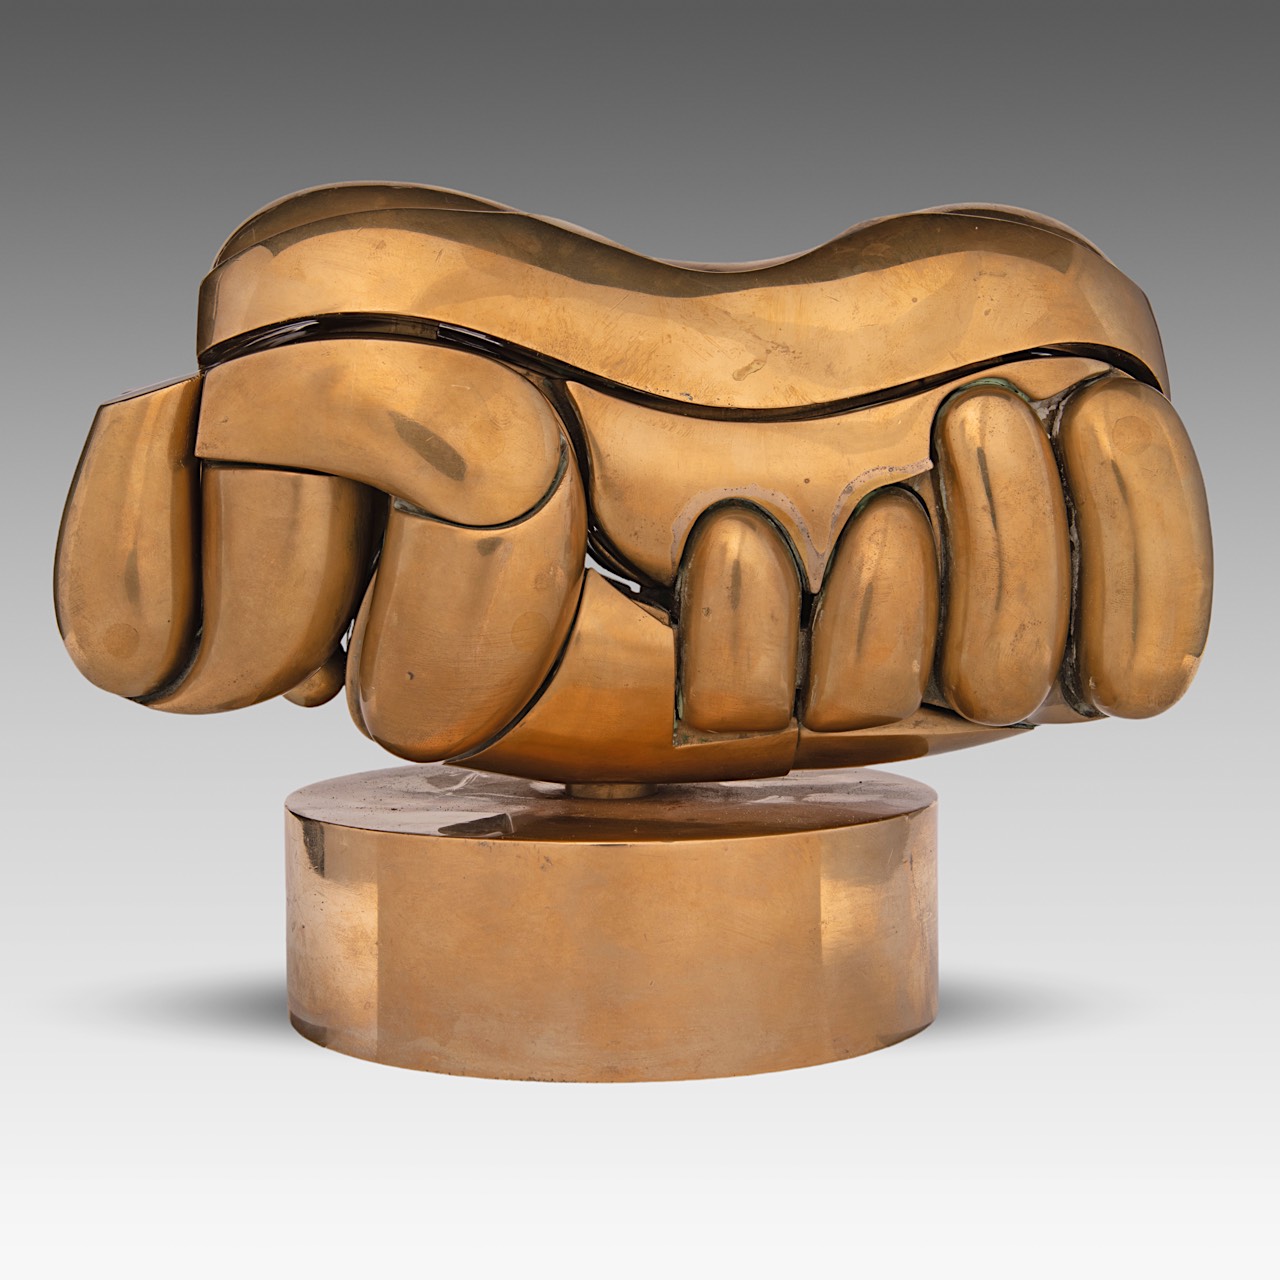 Miguel Berrocal (1933-2006), 'Romeo and Juliet', 1966, Ndeg1, polished brass, H 15 - W 20 cm - Image 7 of 12